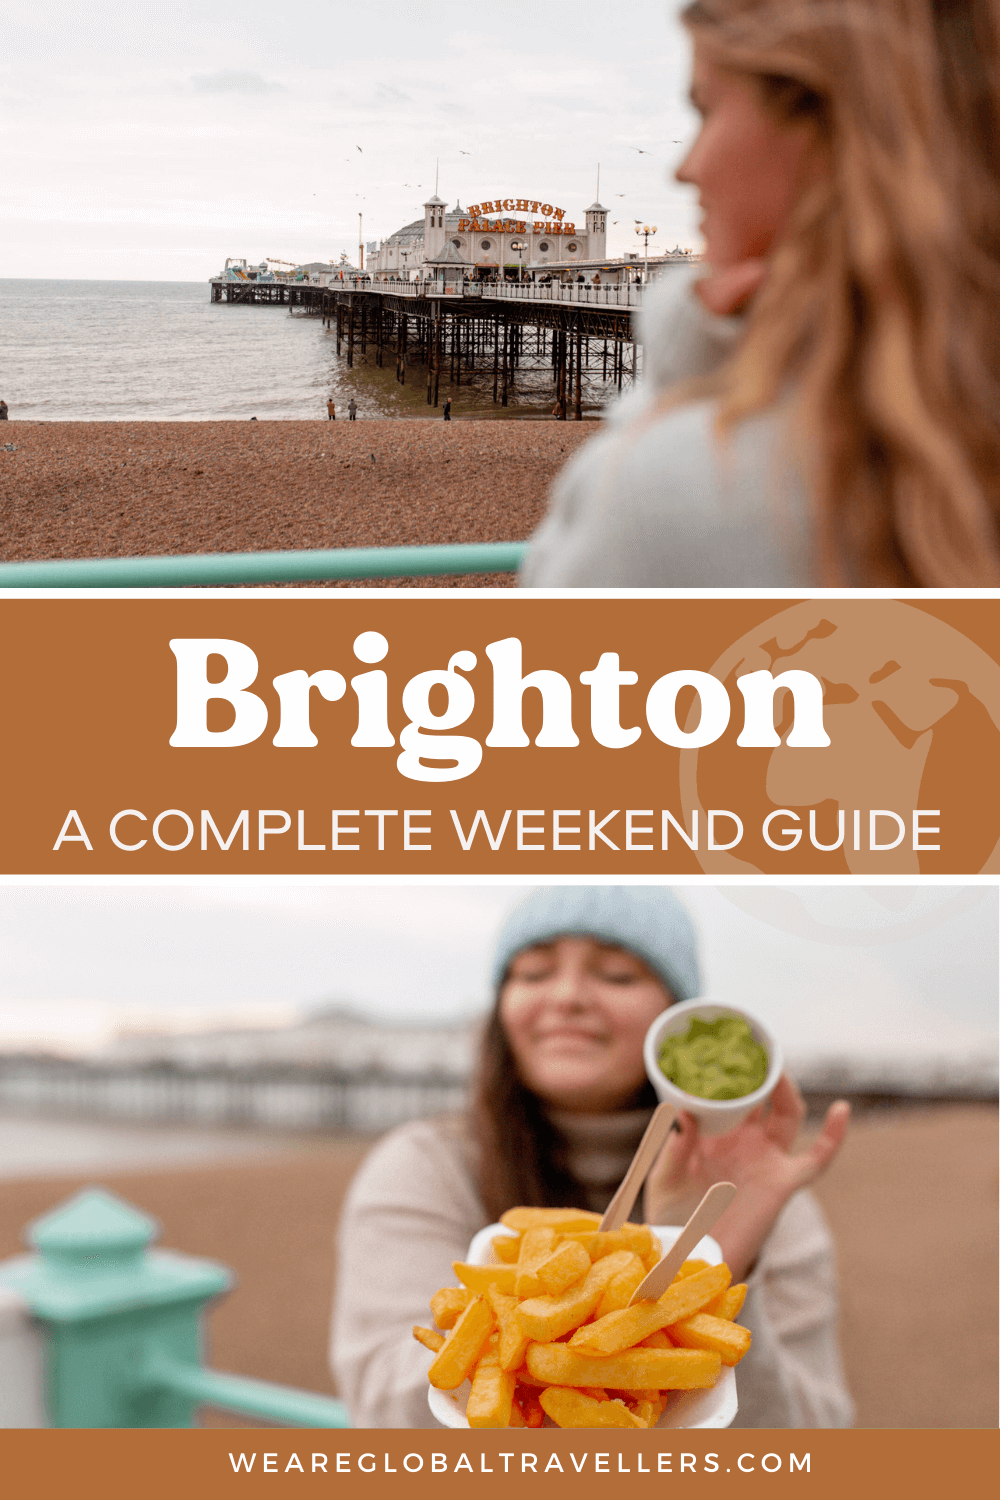 A weekend guide to Brighton, England